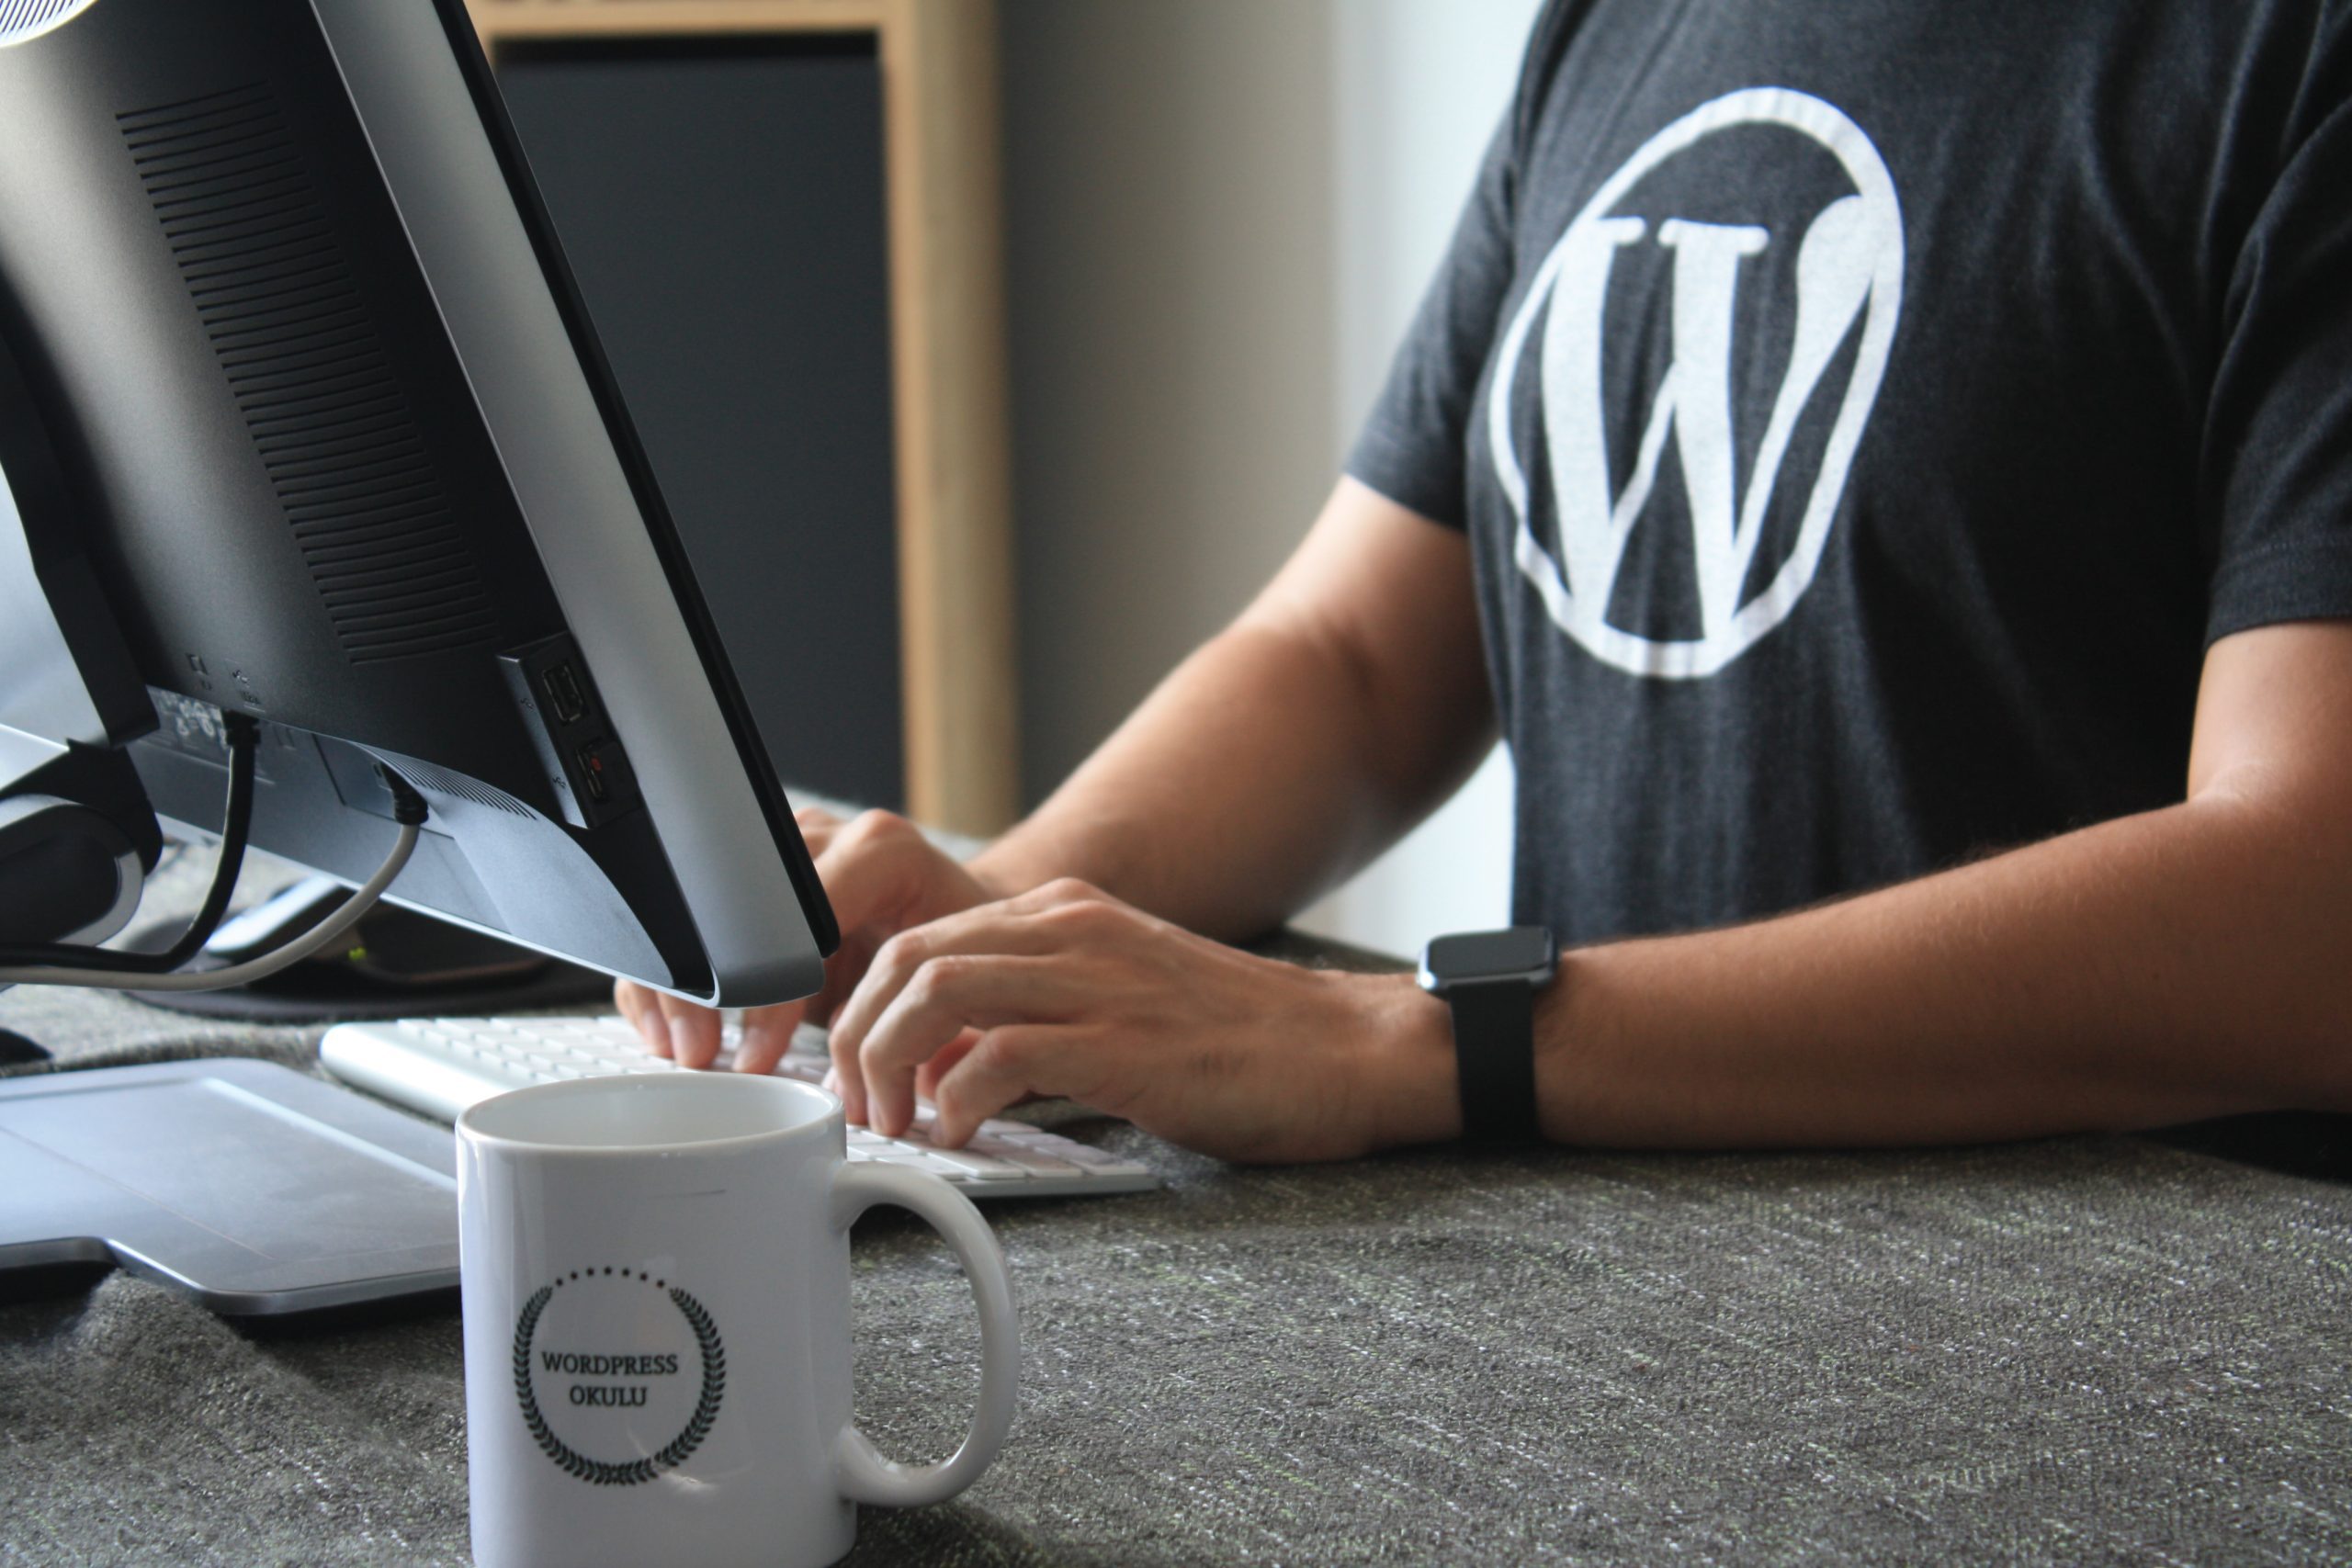 Step Up Your Website’s Visibility with WordPress SEO Tips